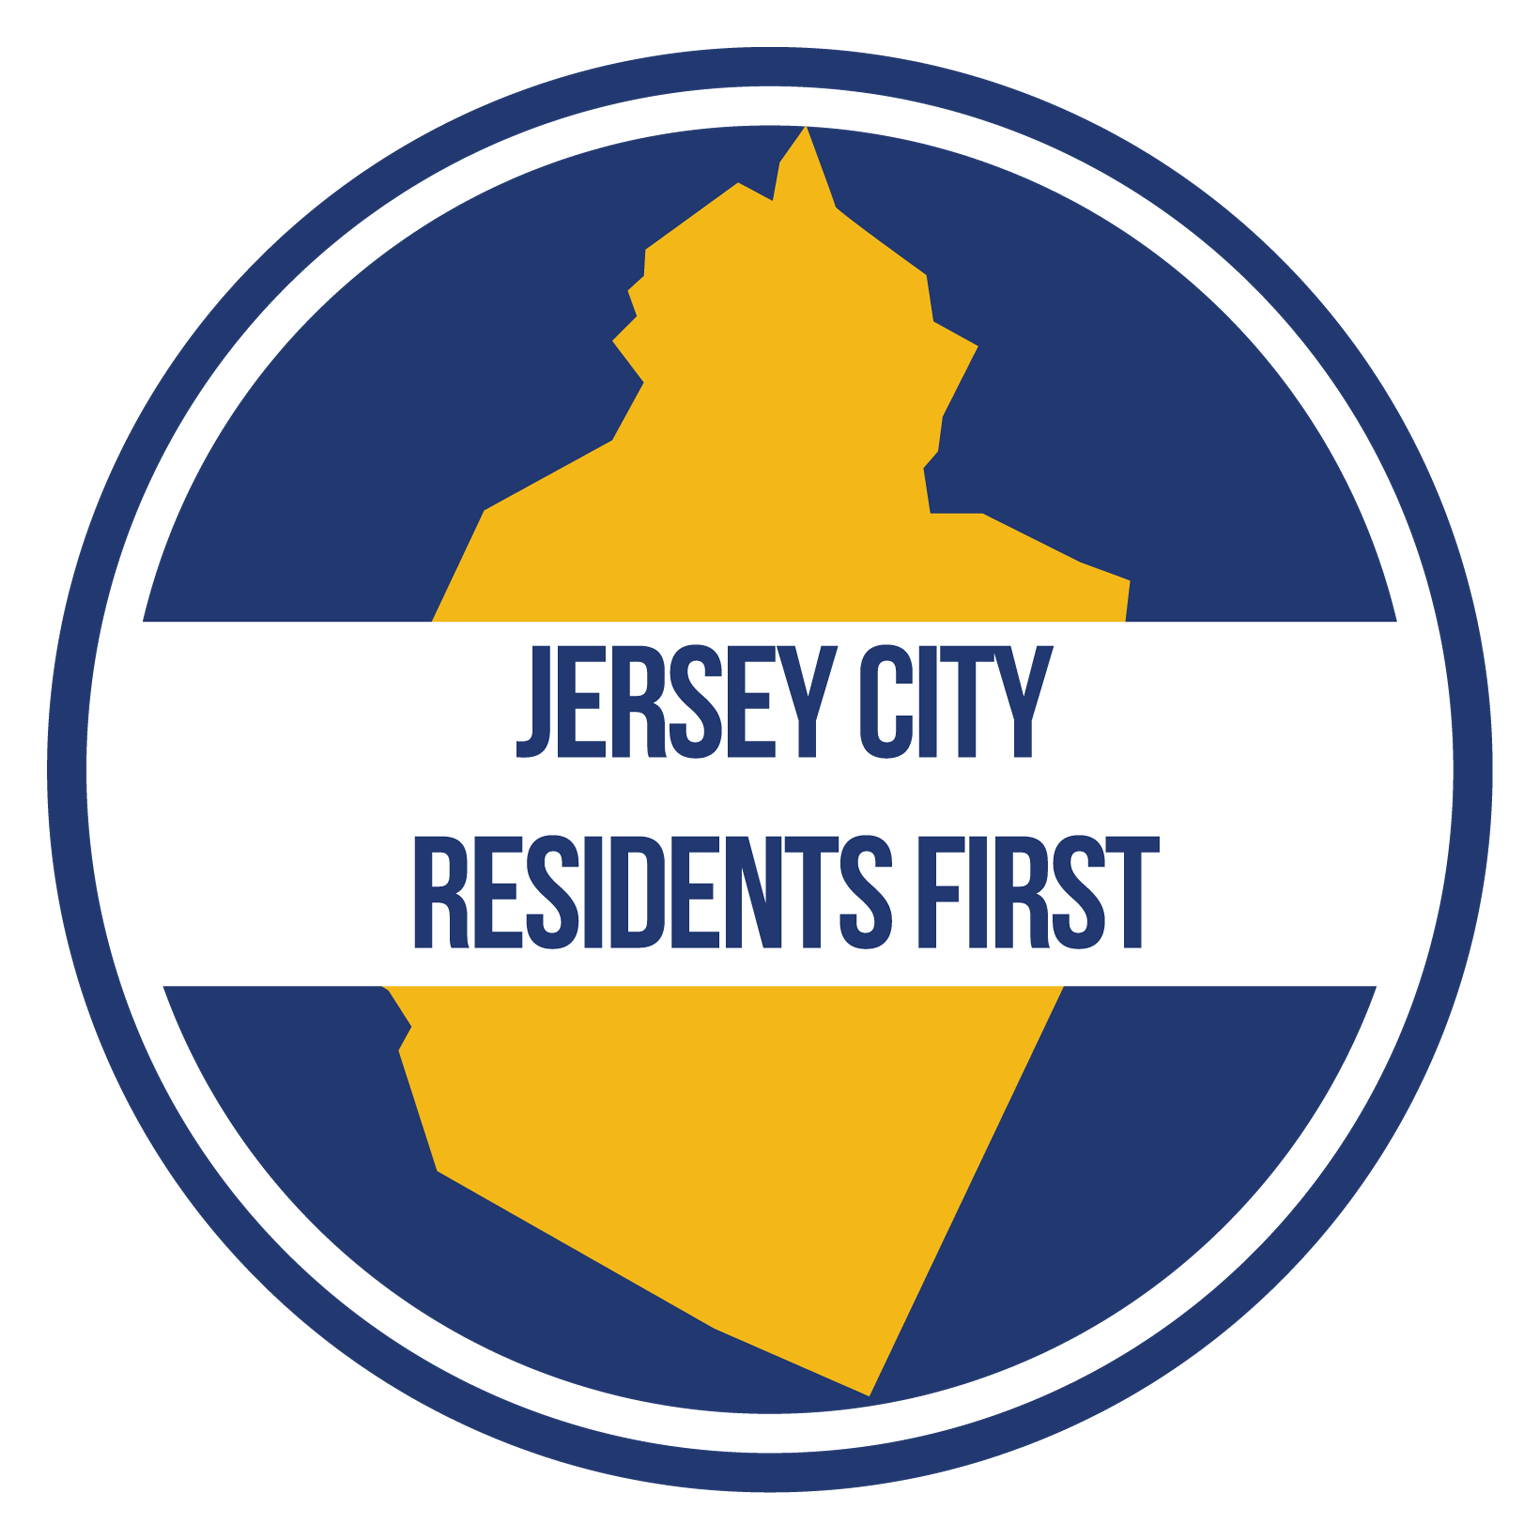 Jersey City Residents First